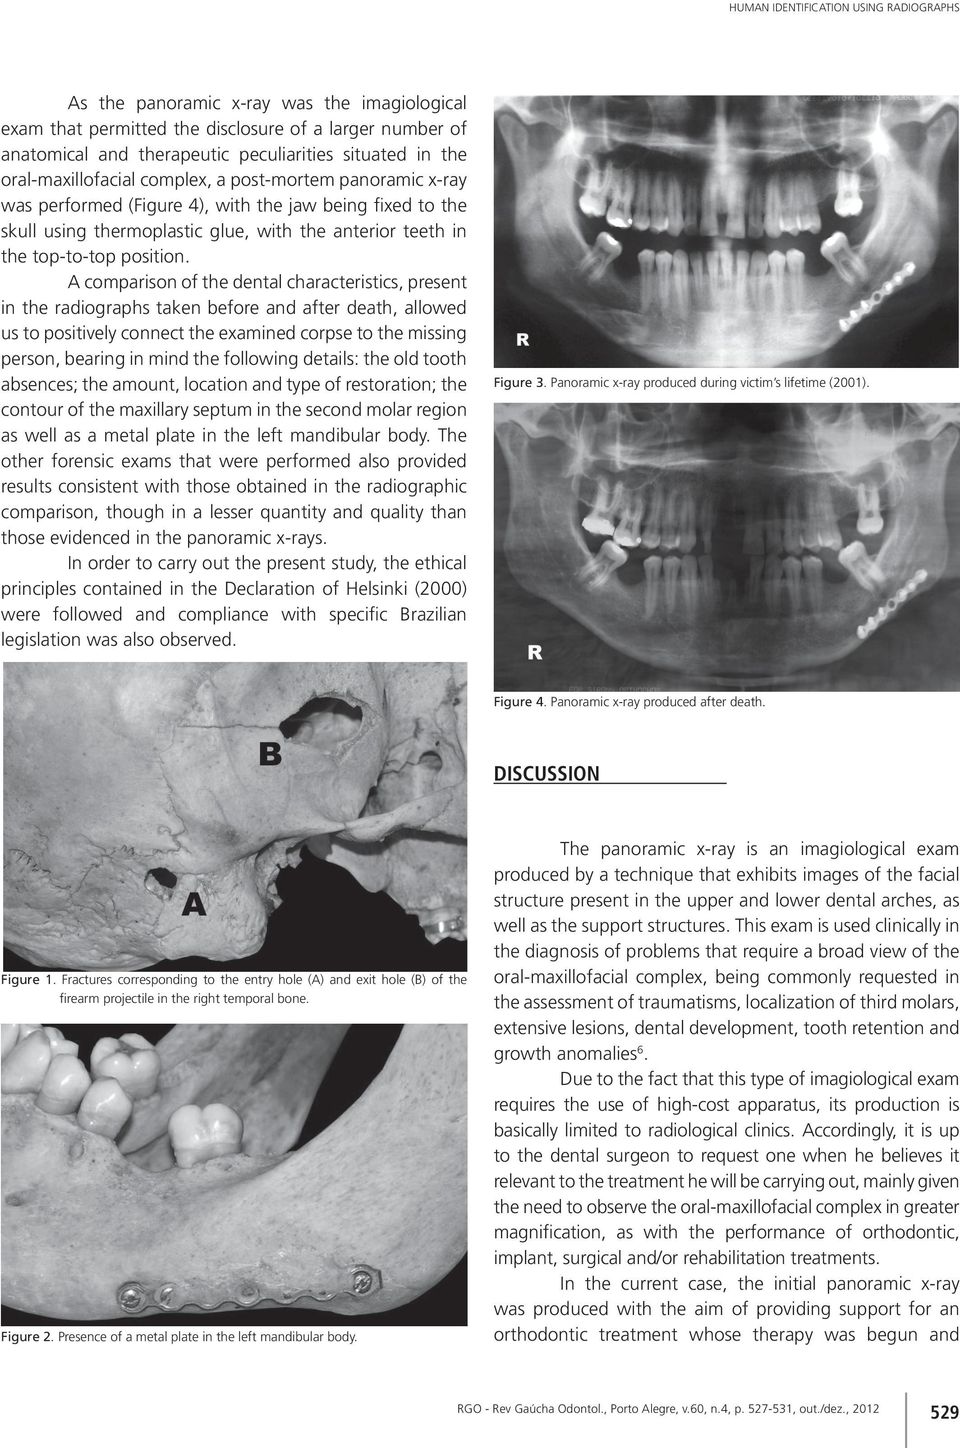 A comparison of the dental characteristics, present in the radiographs taken before and after death, allowed us to positively connect the examined corpse to the missing person, bearing in mind the